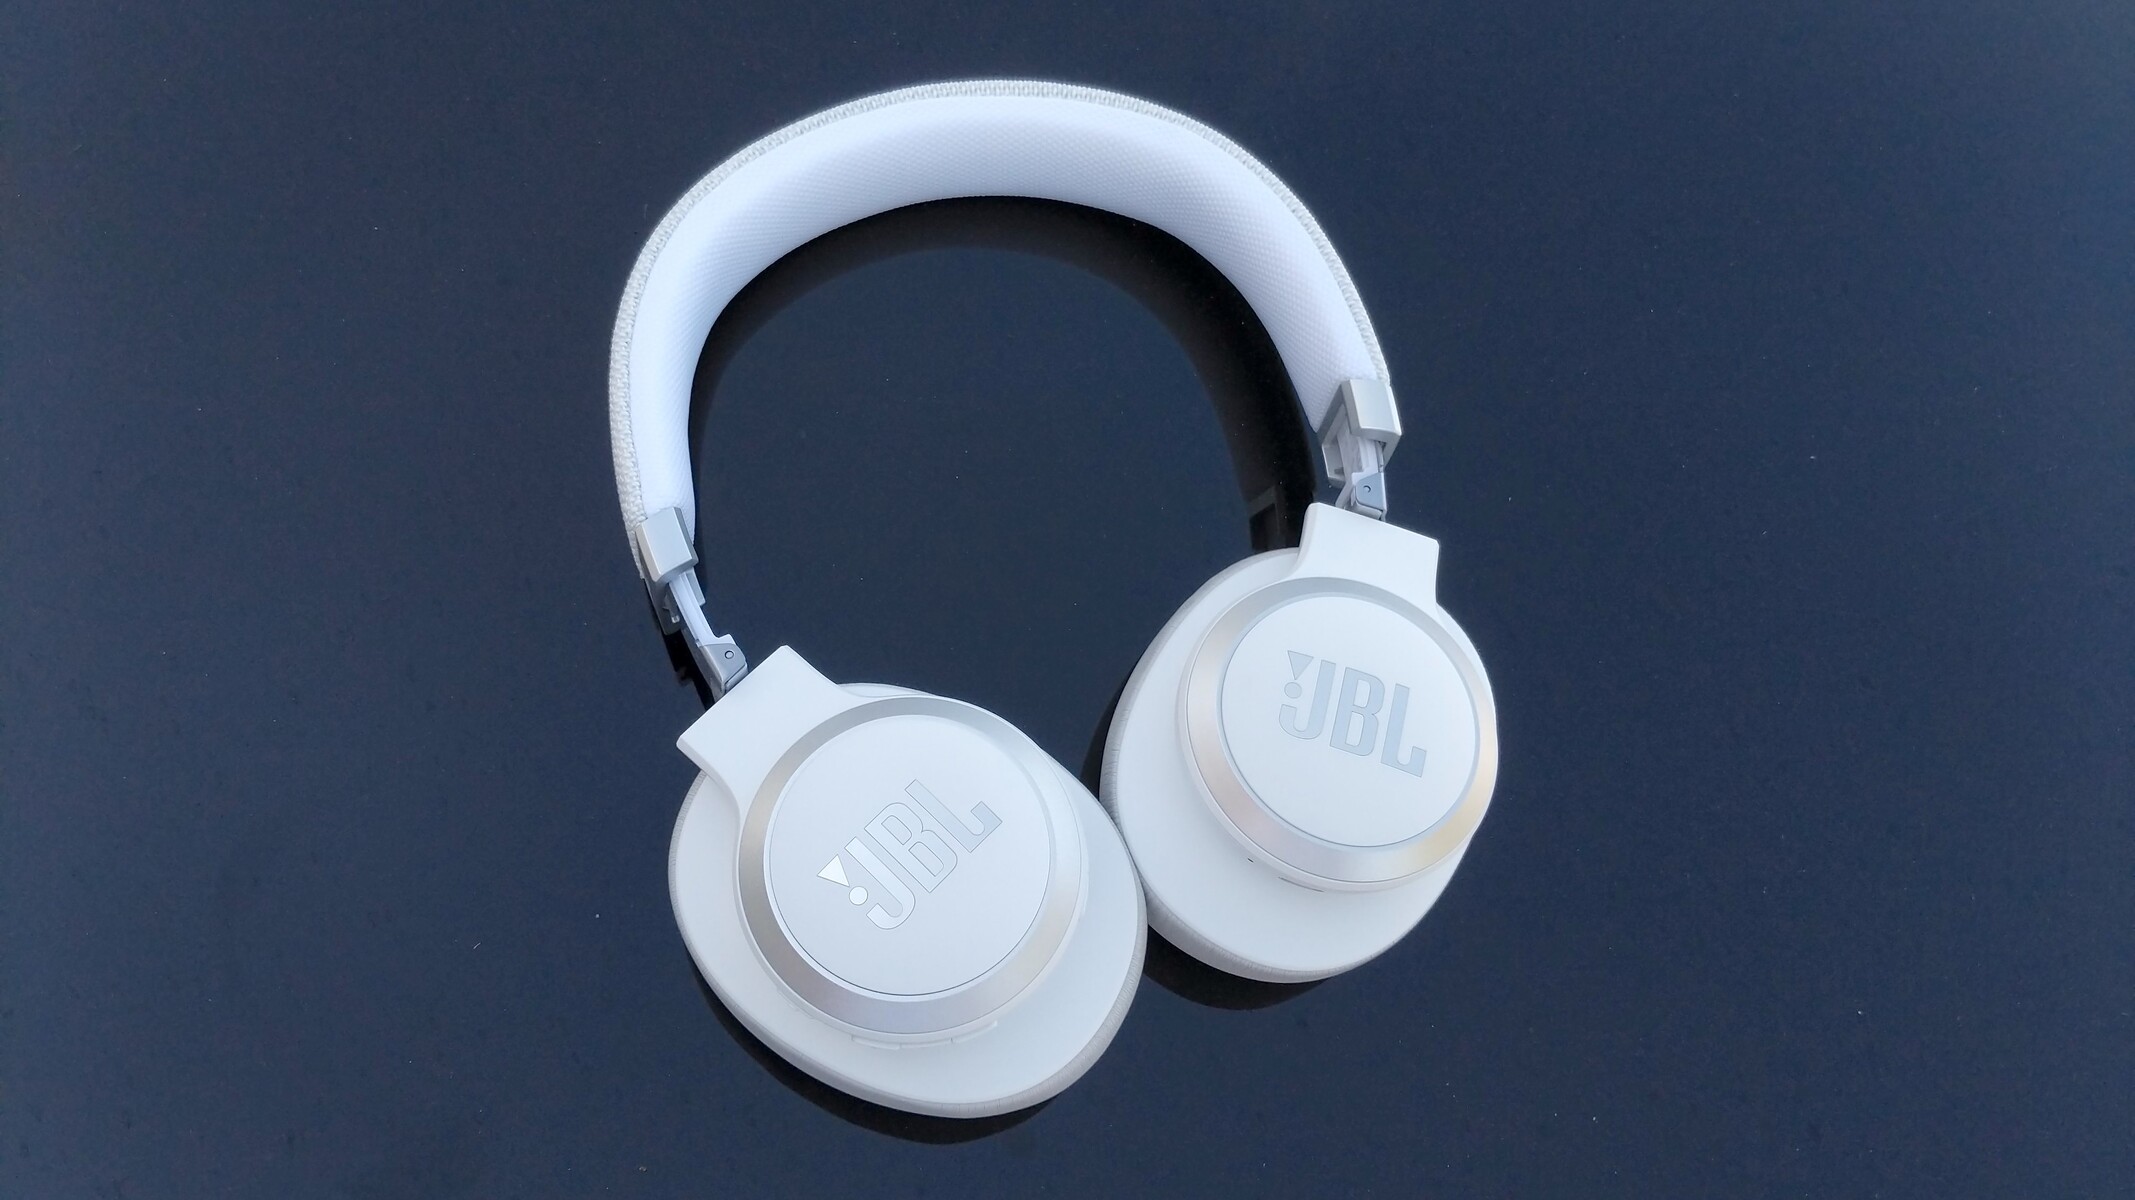 How To Use JBL Noise Cancelling Headphones